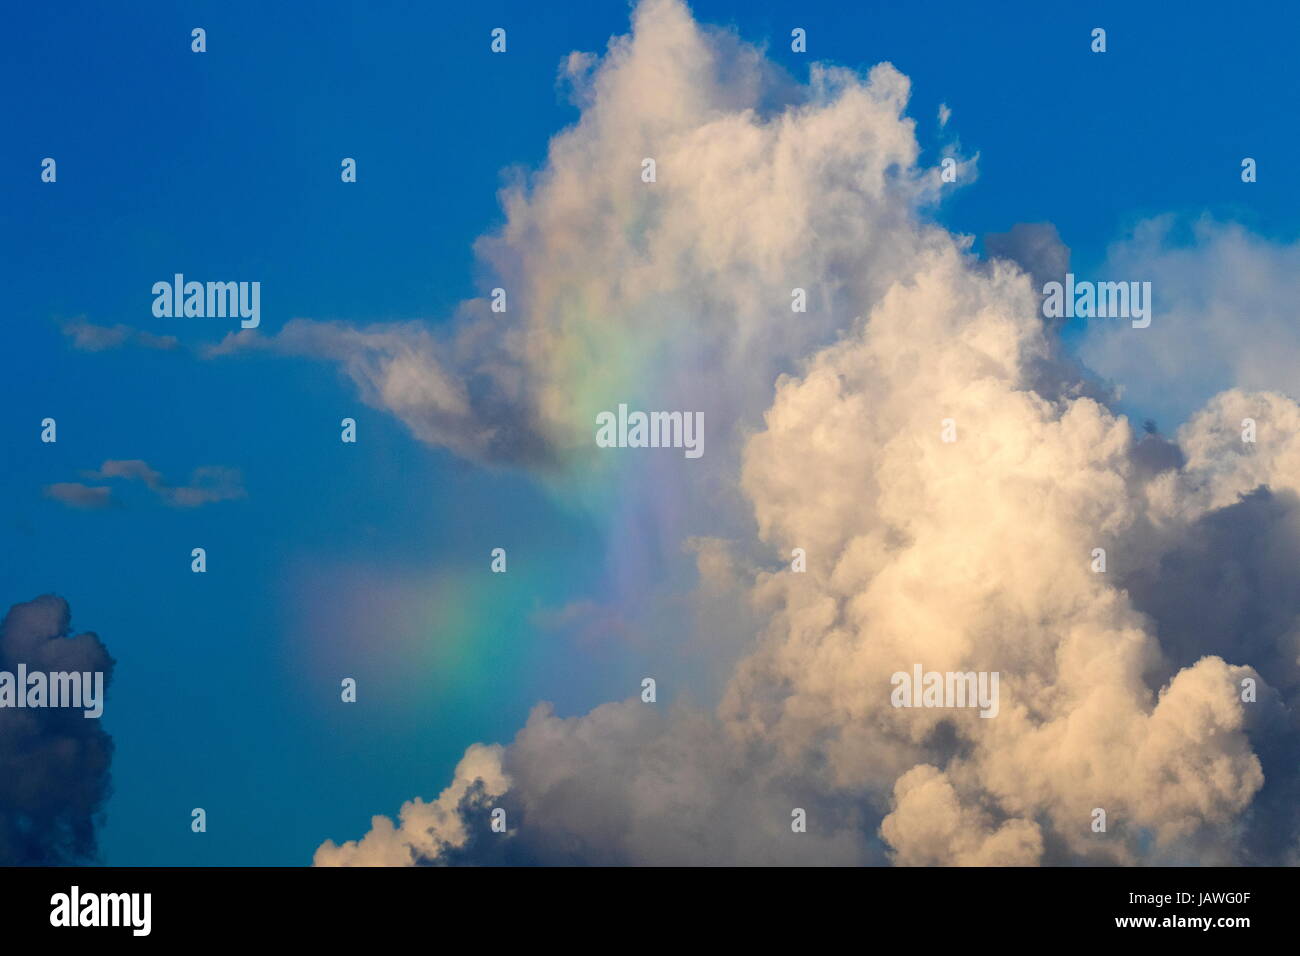 Spectral color among the clouds. Stock Photo